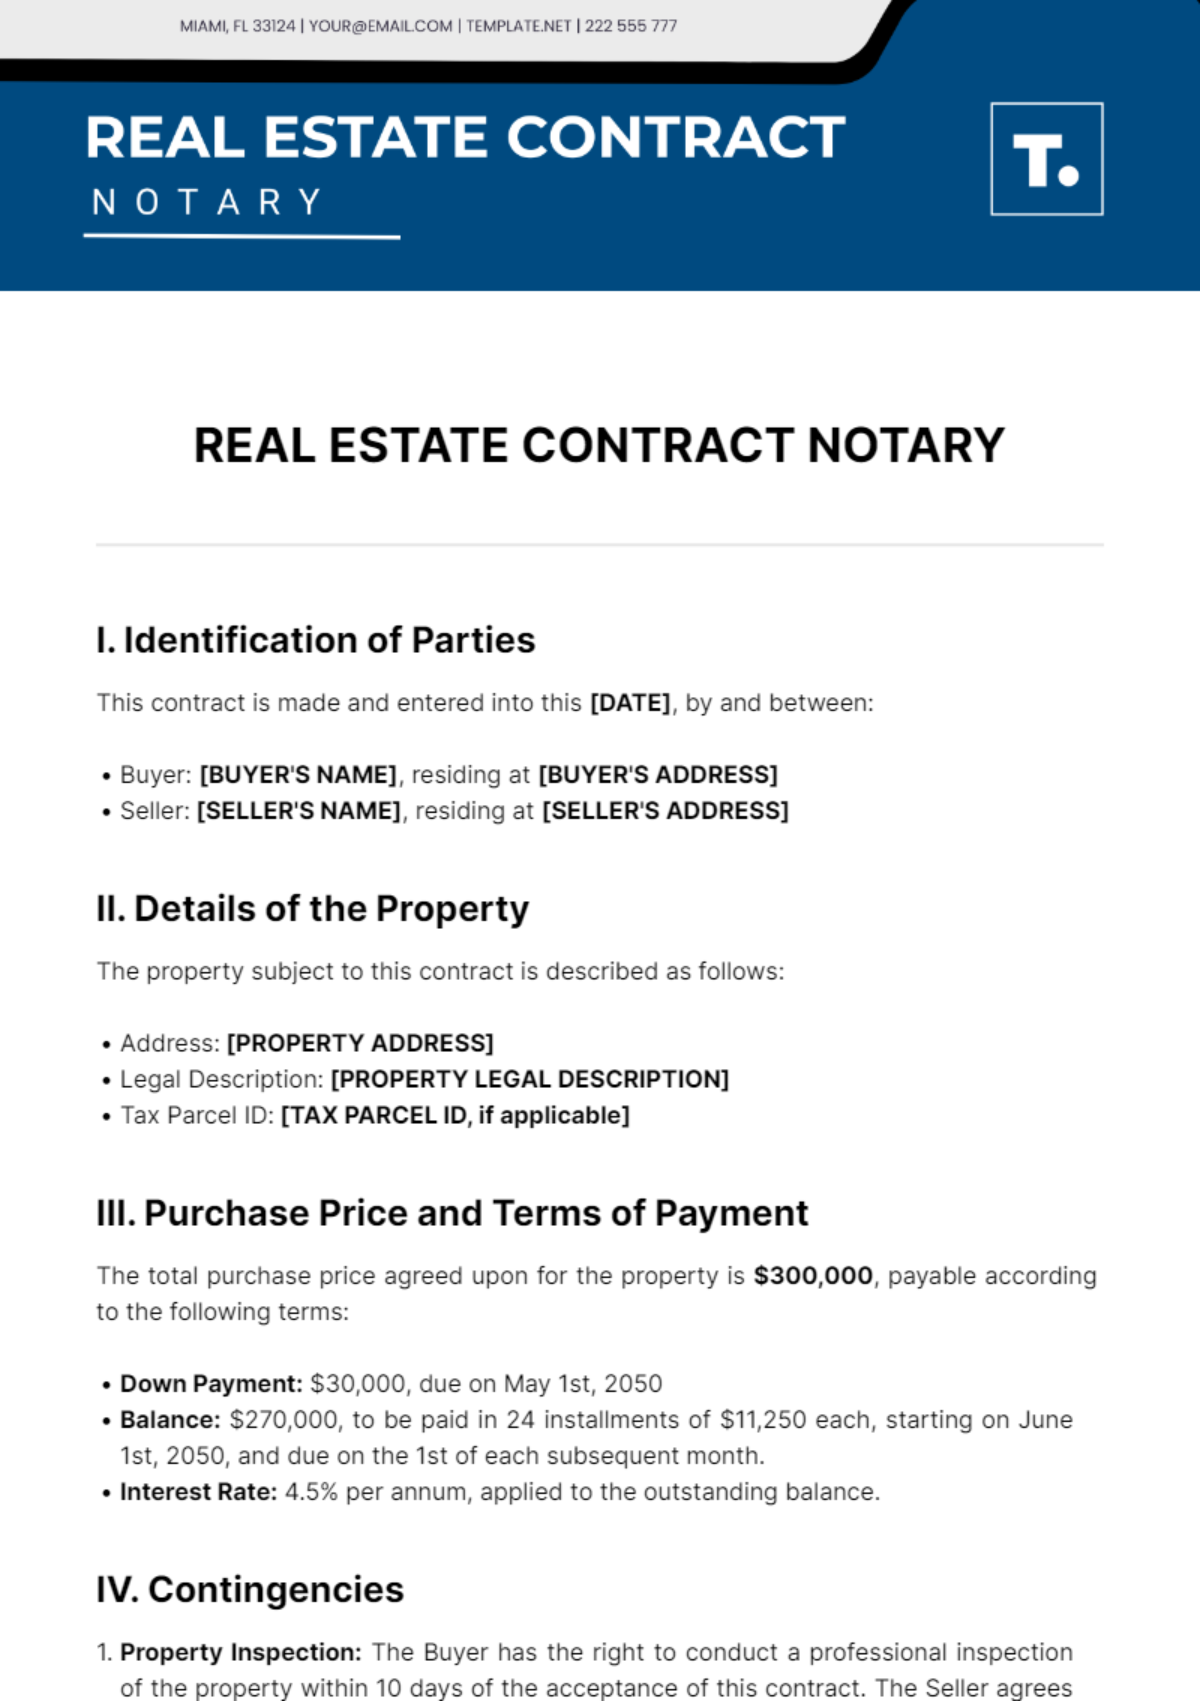 Real Estate Contract Notary Template